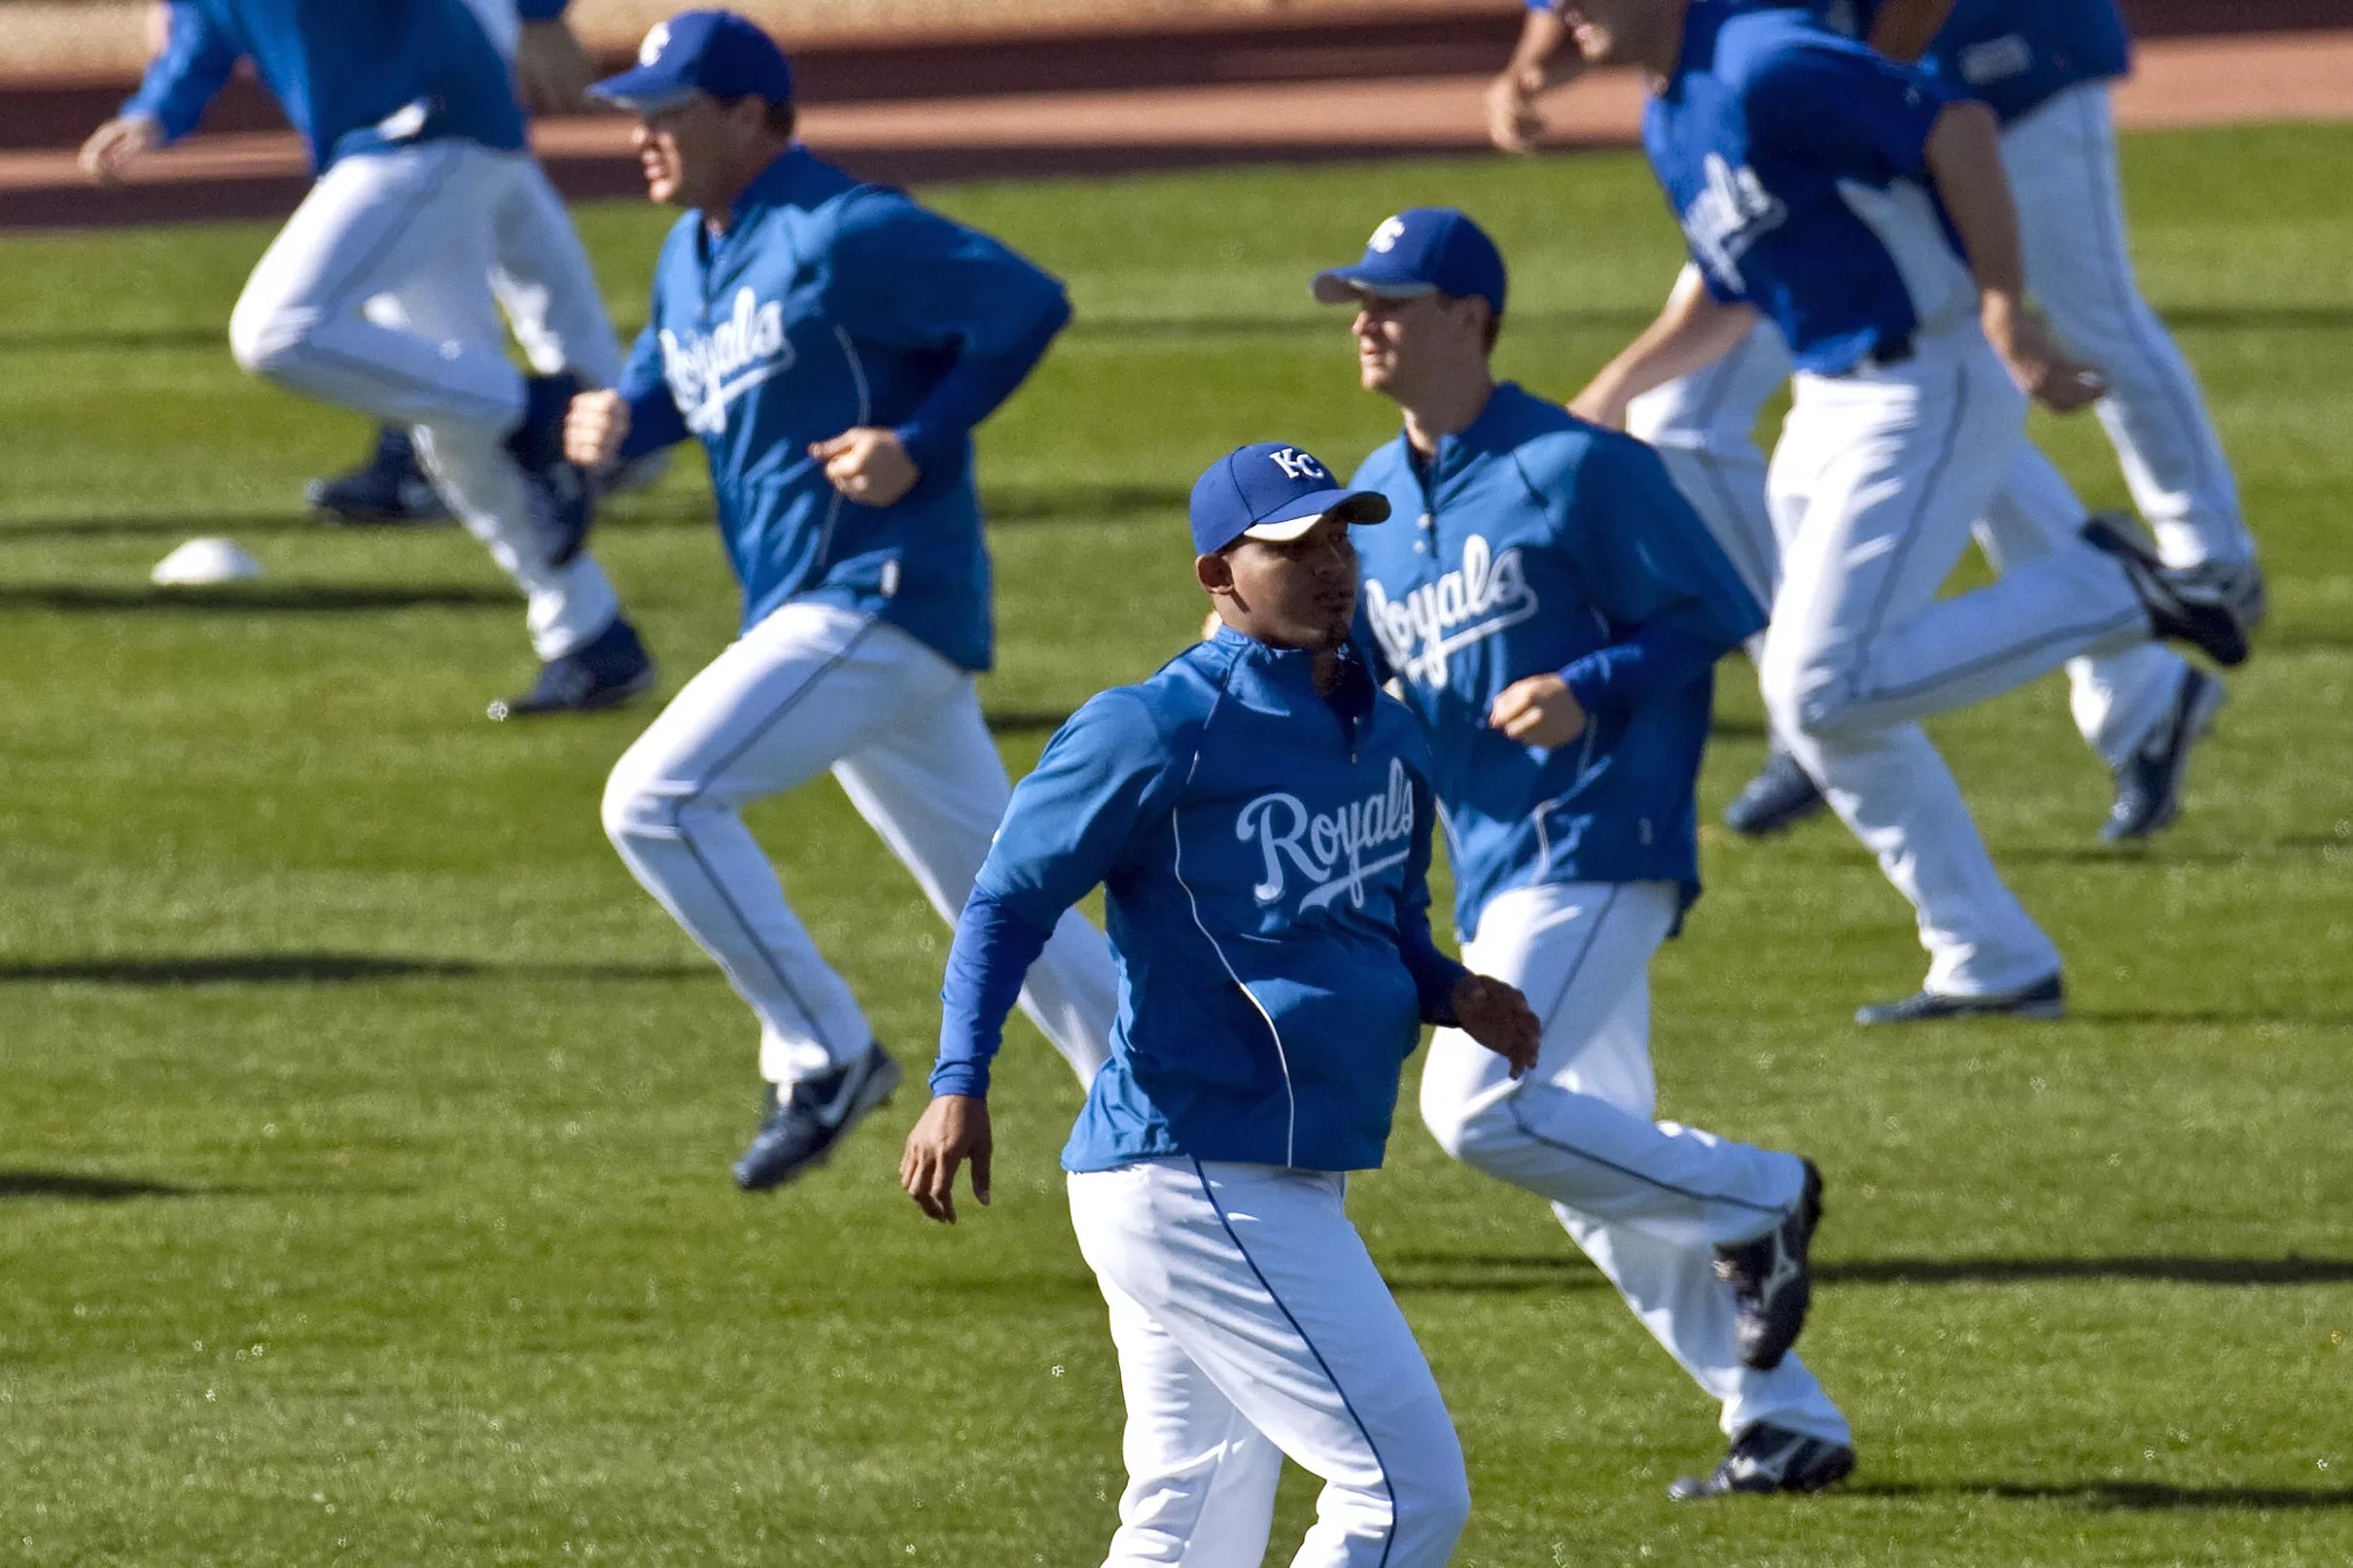 Your guide to 2020 Royals spring training